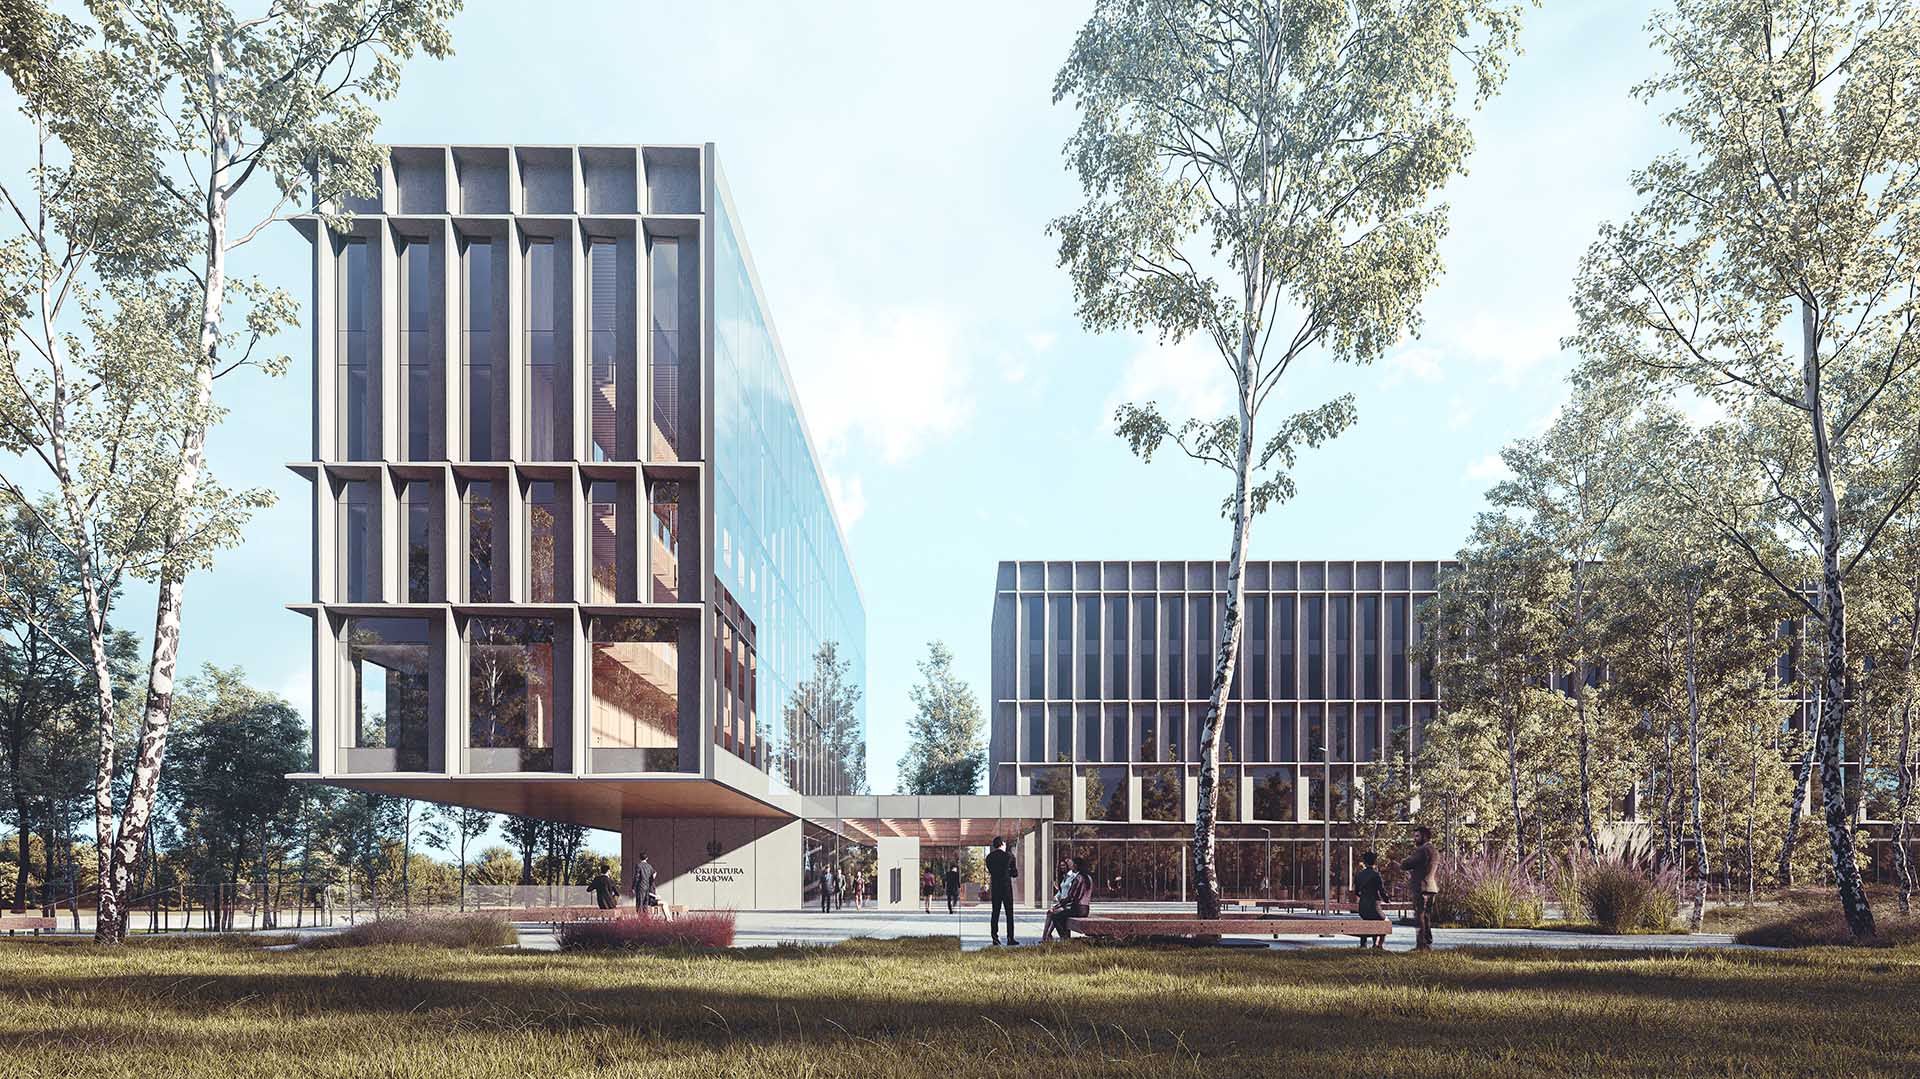 Prosecutor’s office in Katowice – architectural competition 2nd place